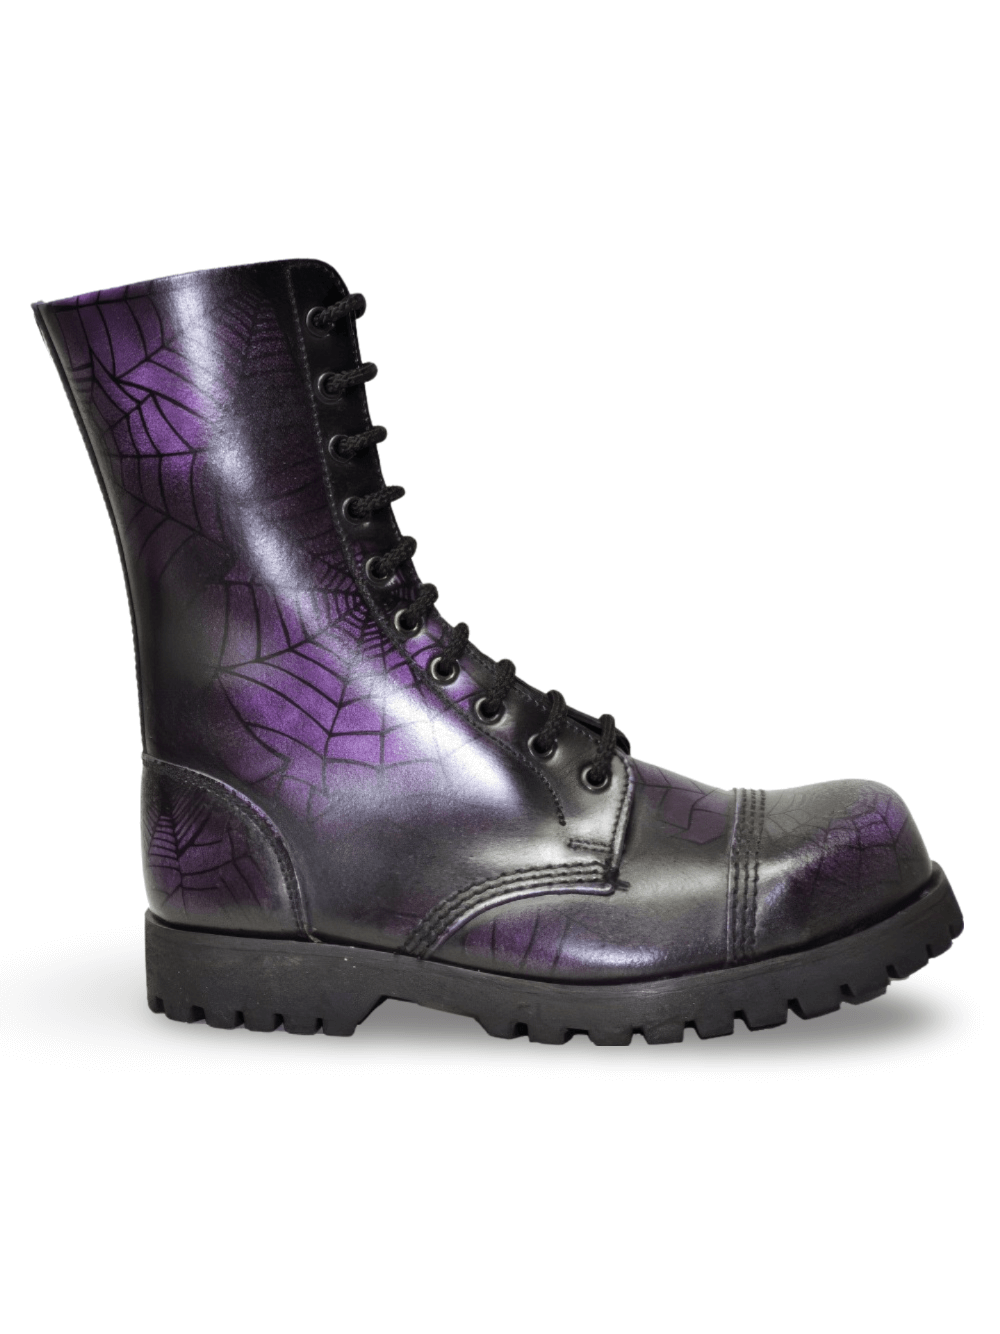 Spider Web Print Rangers Boots with Metal Toe and Laces